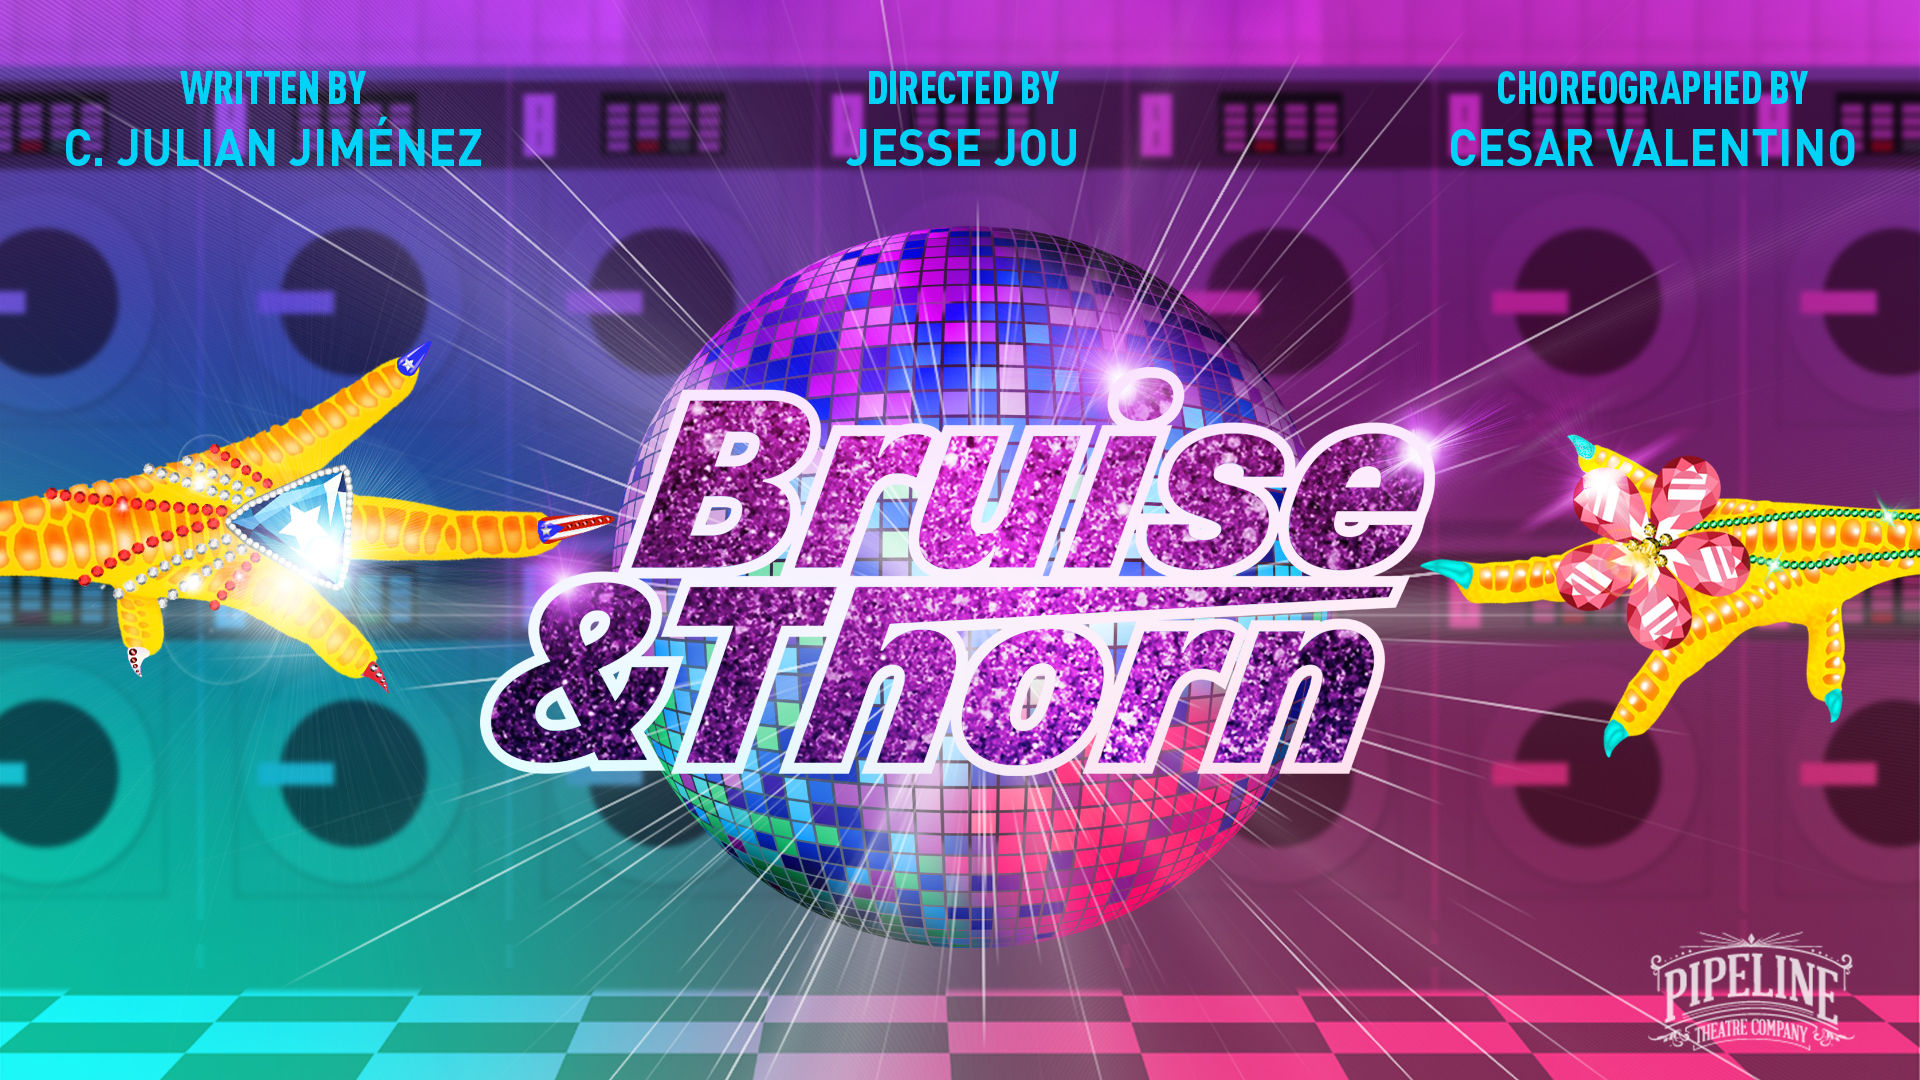 Logo for Bruise & Thorn. Disco ball on a bright purple background, with Bruise and Thorn in yellow type.